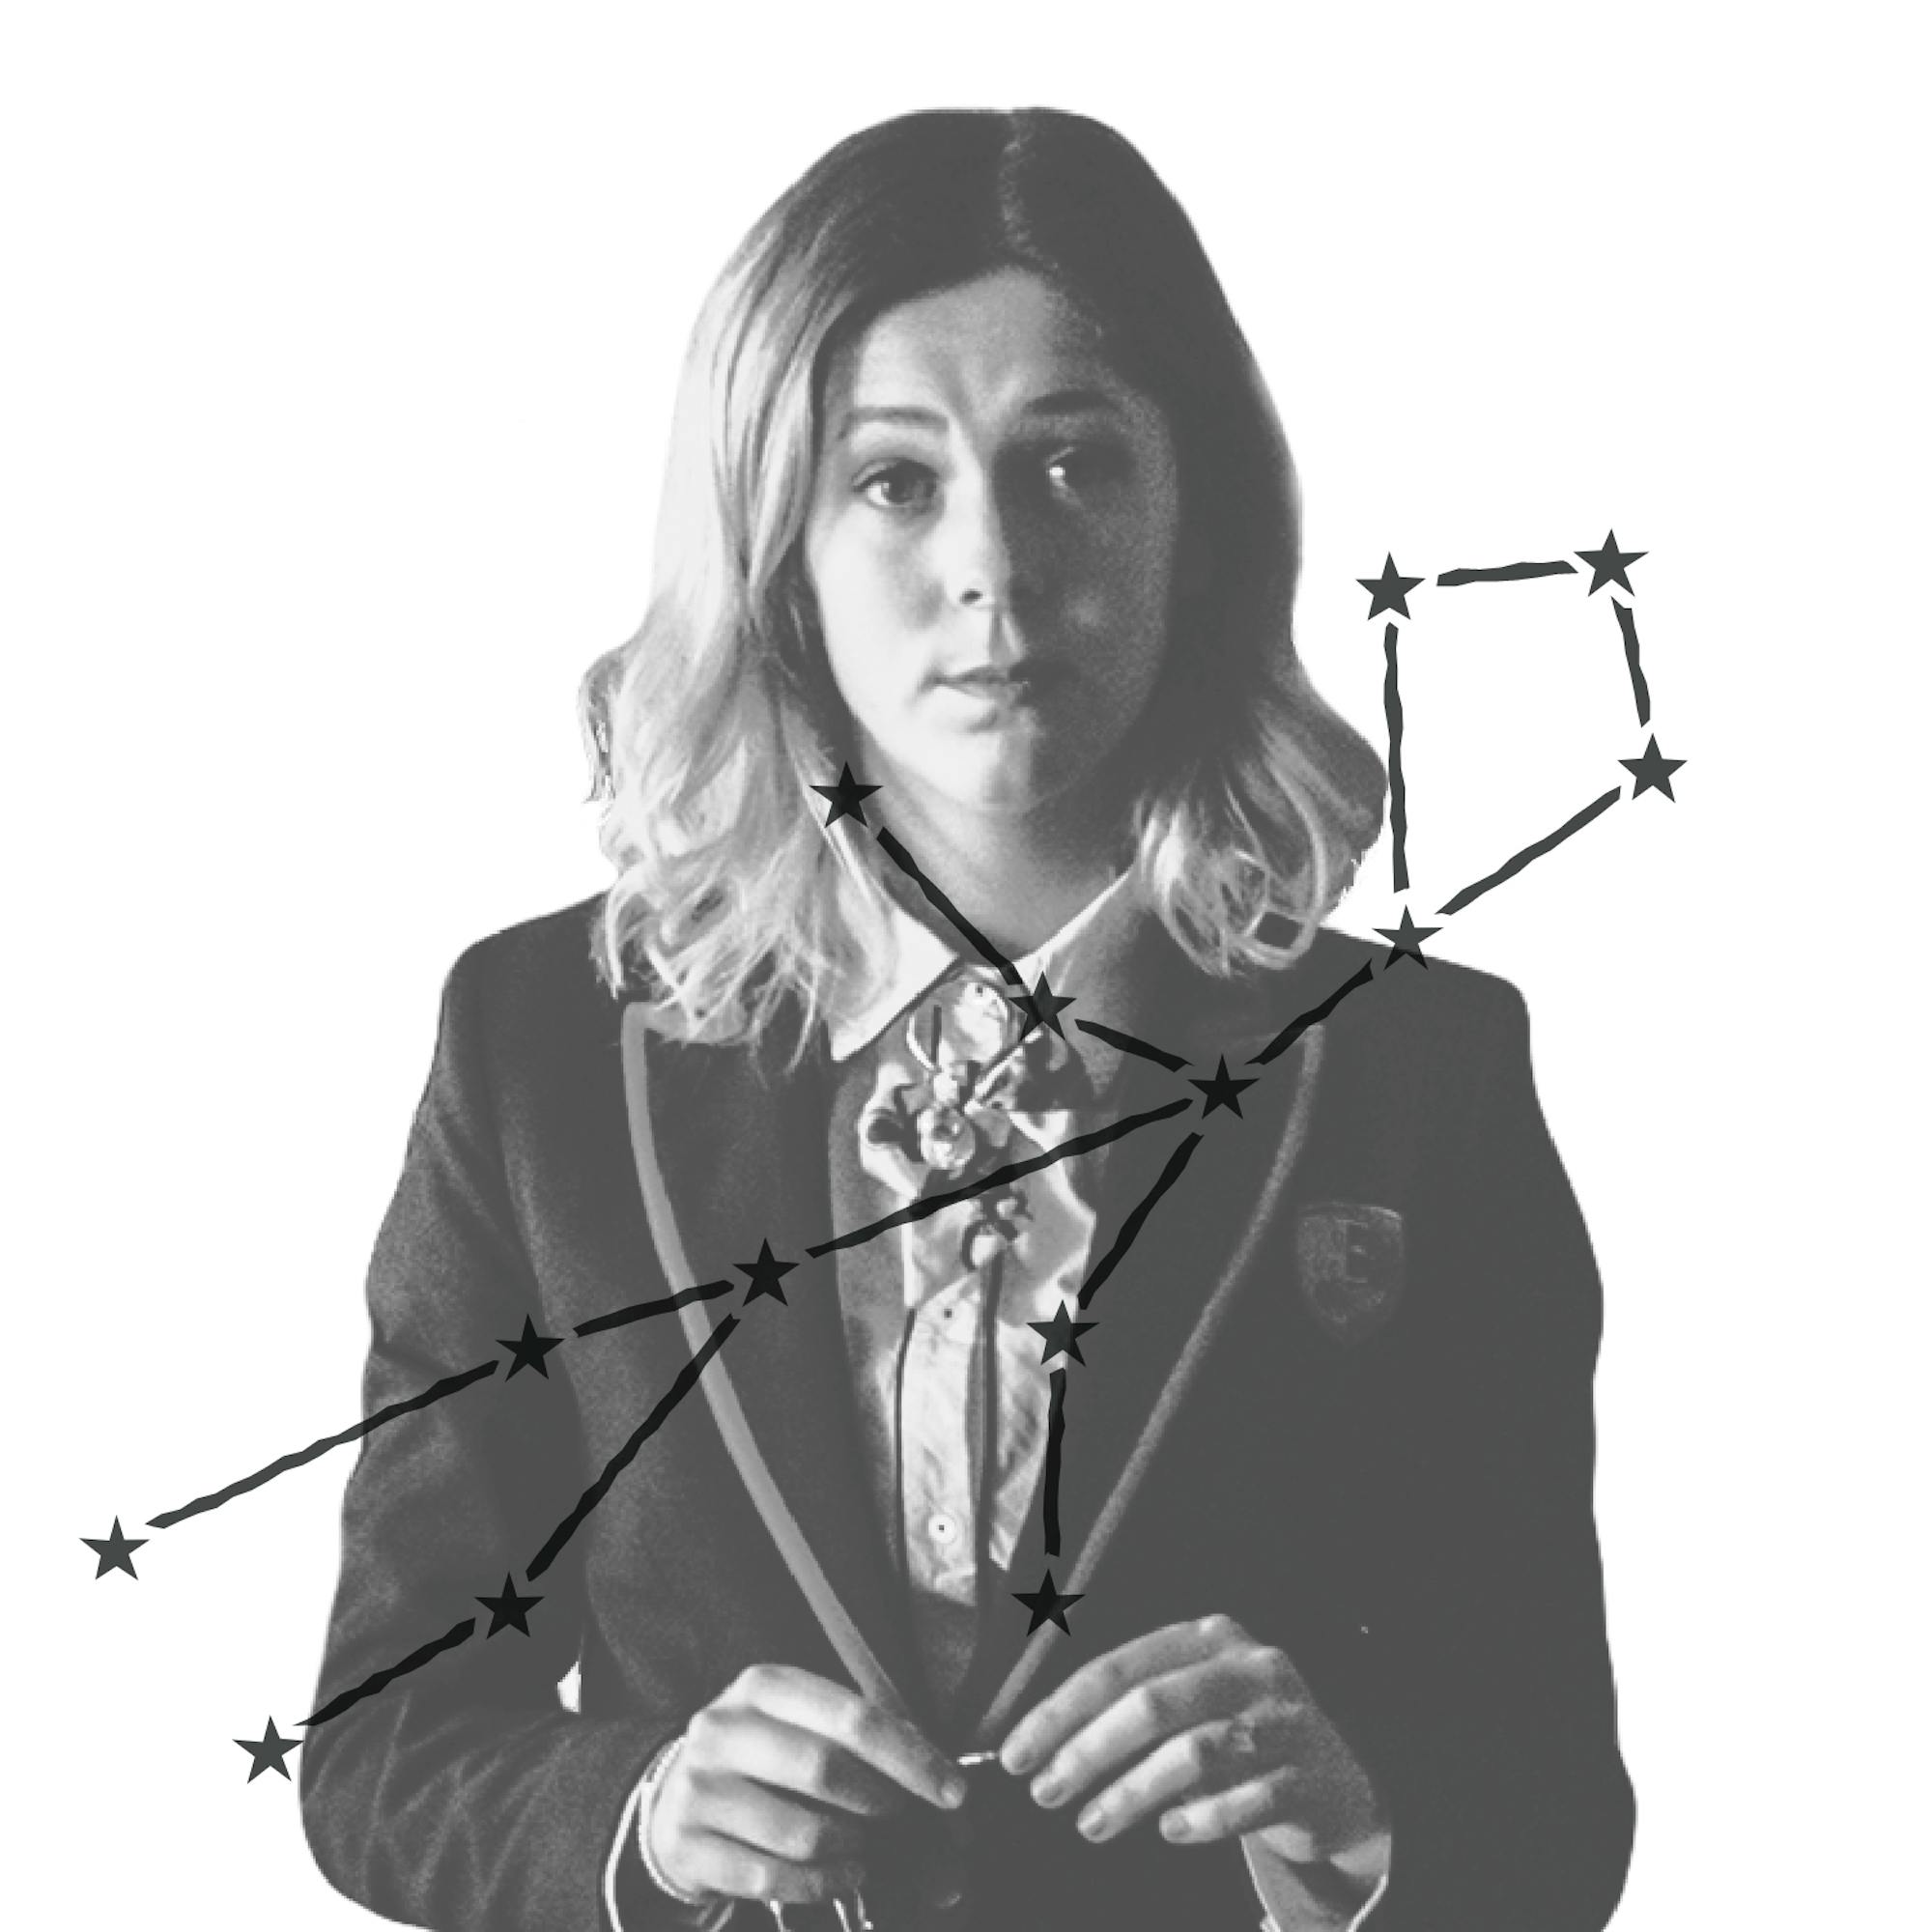 Cayetana Grajera Pando (played by Georgina Amorós) is all business in her school blazer in this still from <i>Elite</i>. She looks like she gets what she wants. Over the image is an illustration of Cayetana’s zodiac constellation.